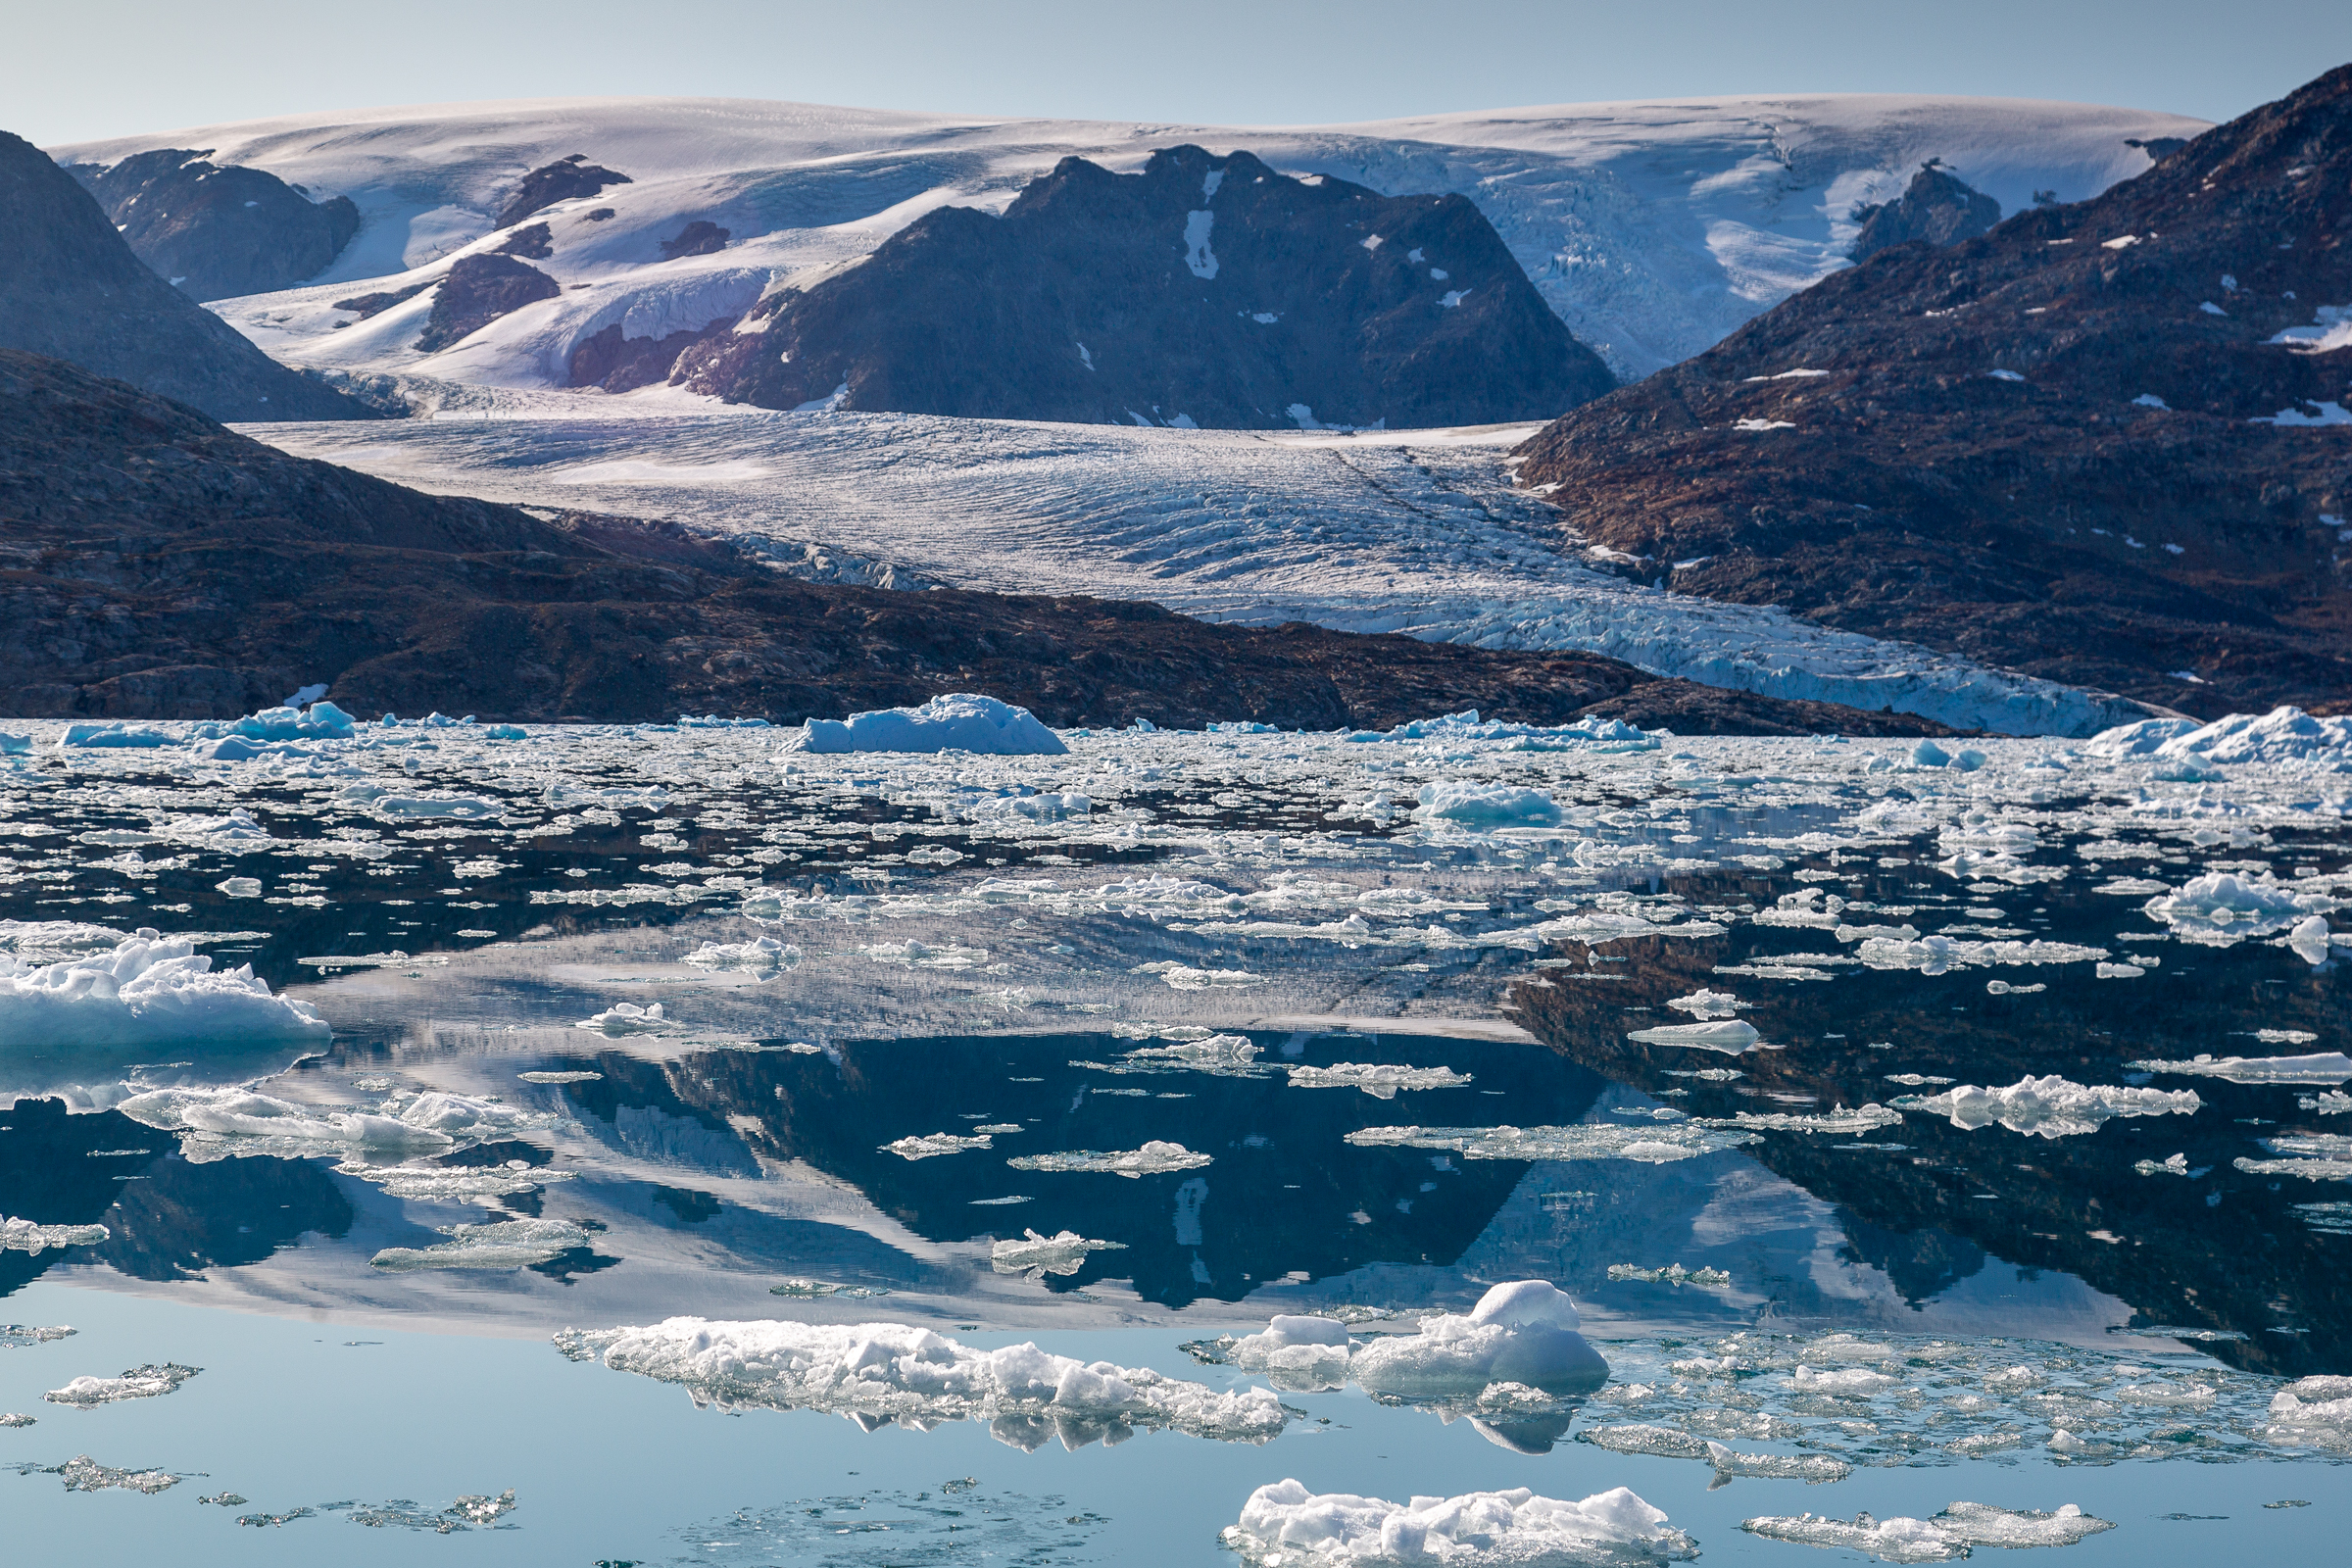 Impressive view over mountain, glacier and icebergs. Photo by Lars Anker Moeller - Visit East Greenland